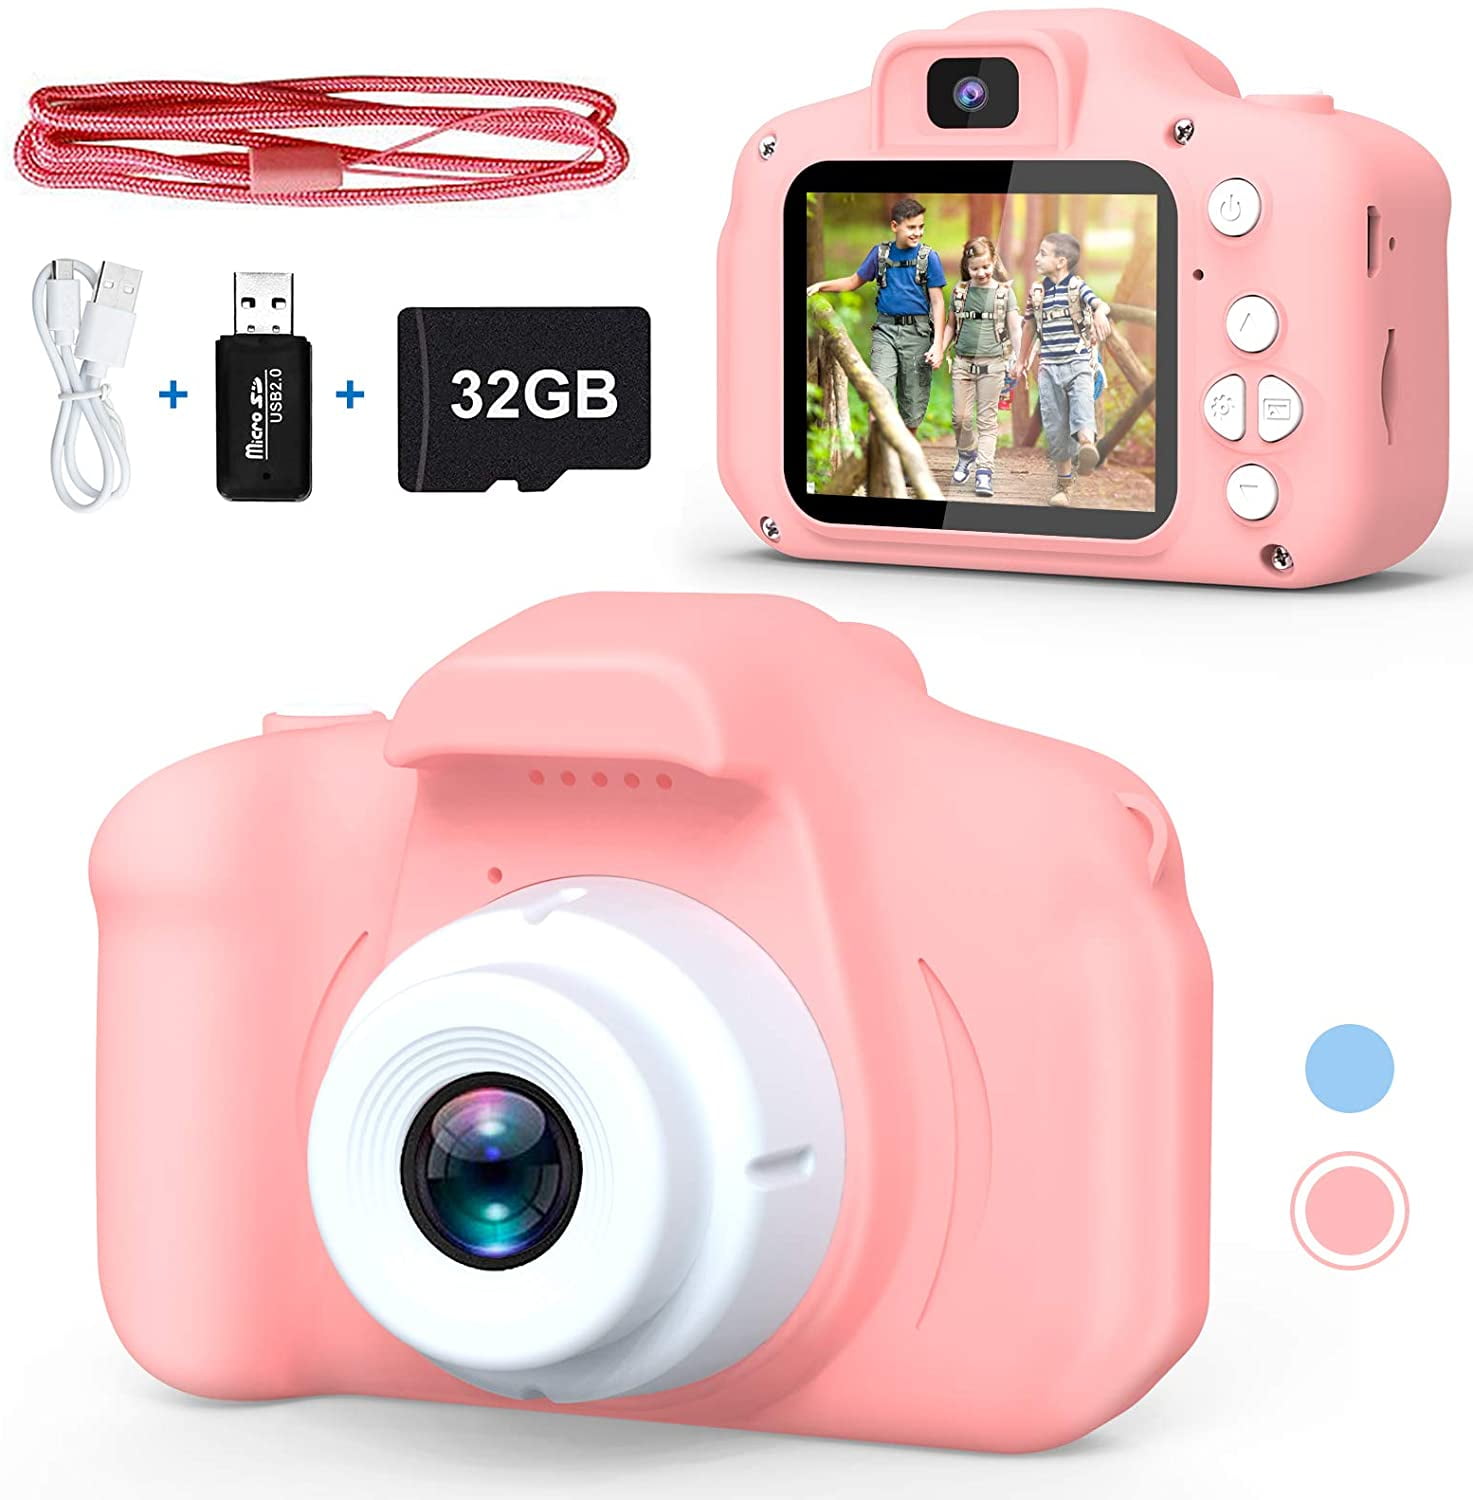 Kids Camera Girls Child Digital Camera with HD Dual Lens 2.0 Inch IPS Color Screen MP3 Player Children Cute Mini Toy Camcorder with 32GB SD Card,for 2-14 Years Kids Birthday Traveling Gift 